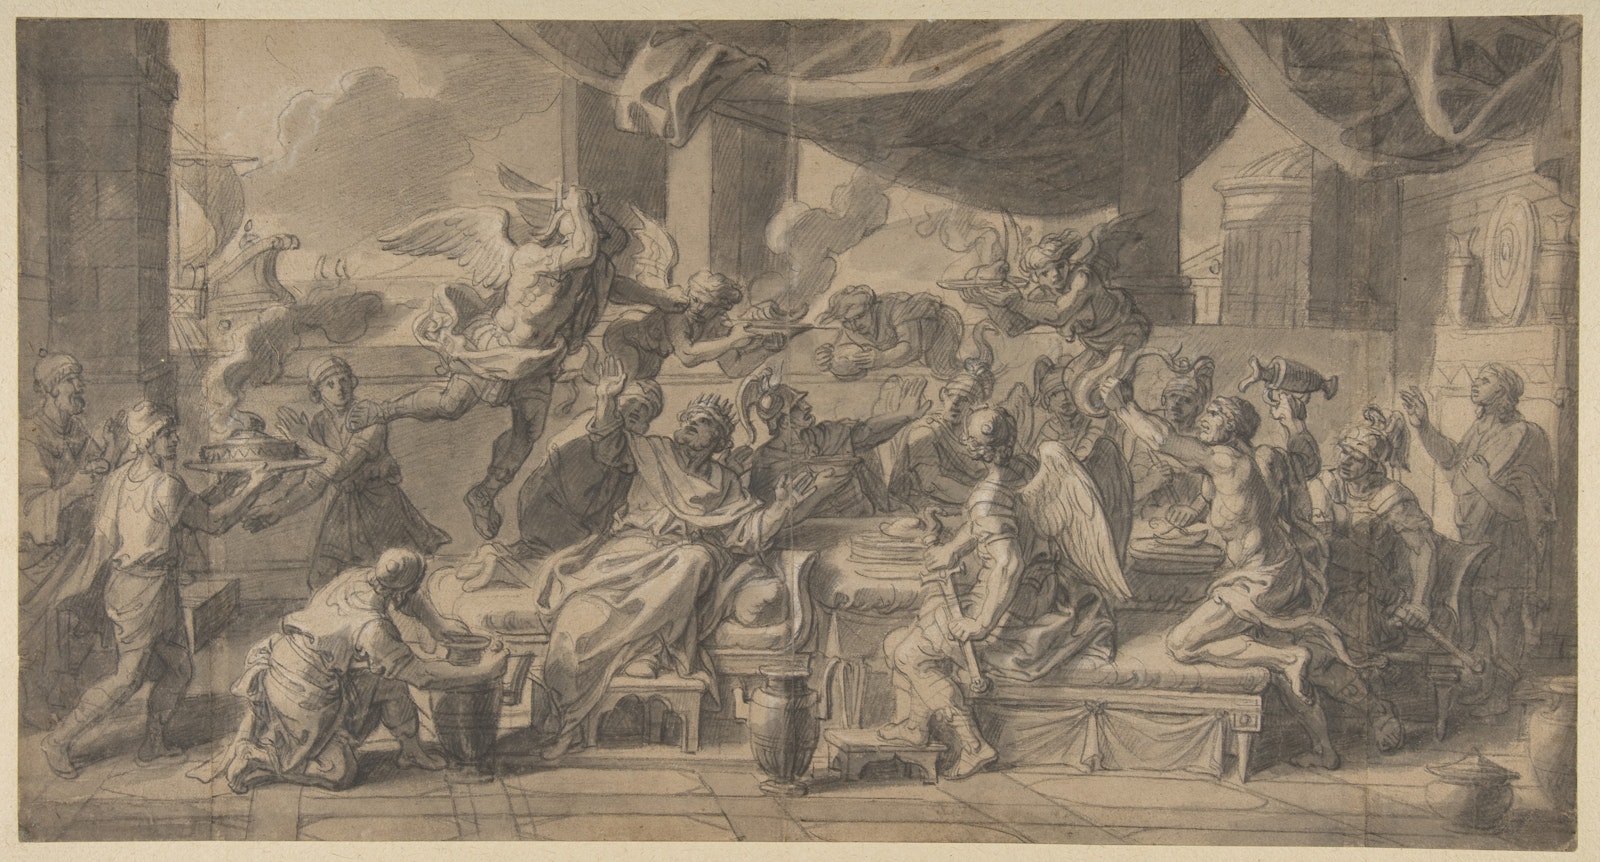 The harpies driven from the table of King Phineus by Zetes and Calais, François Verdier, 17th or 18th century.